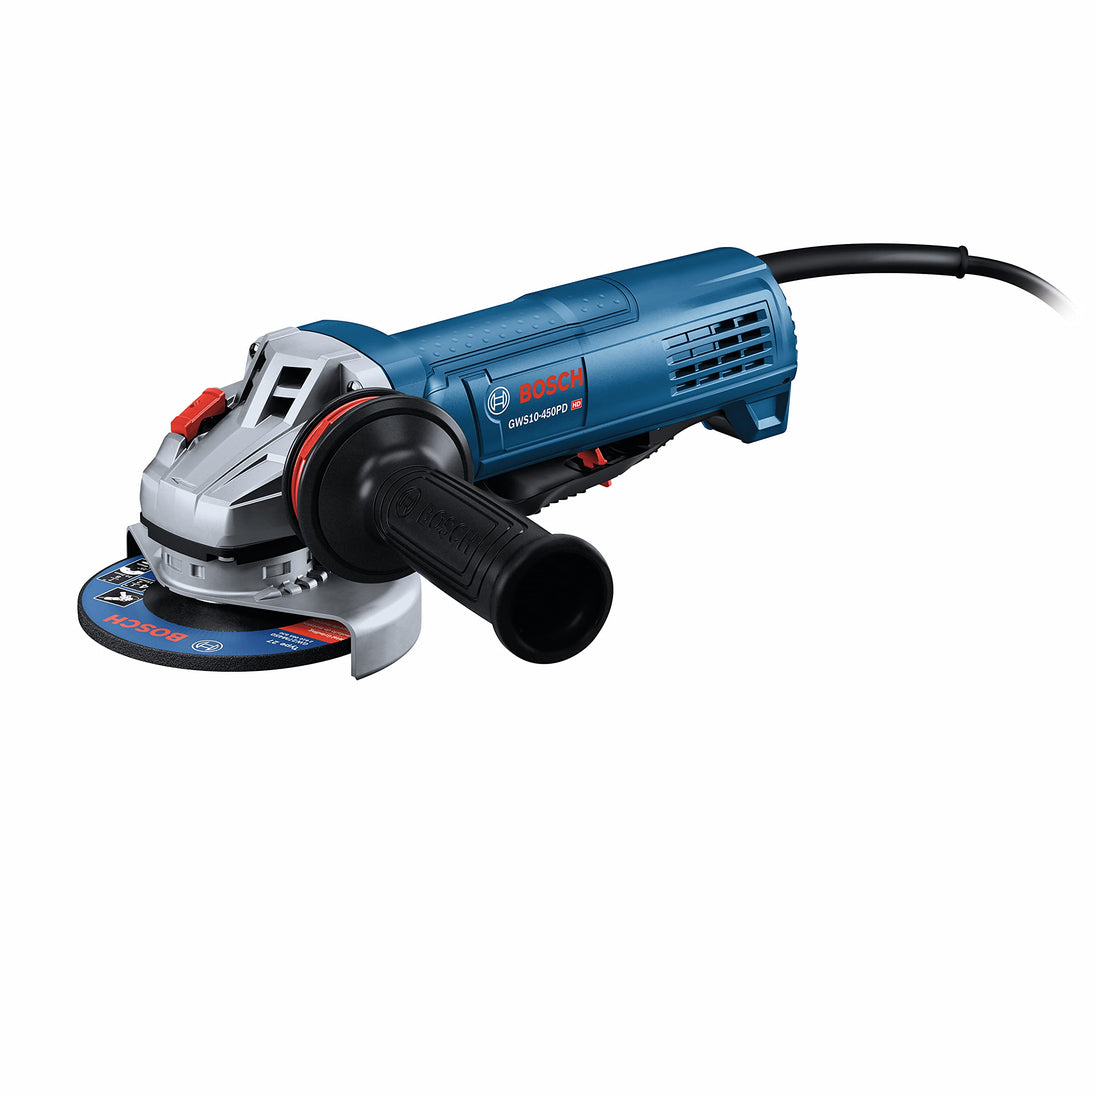 Bosch GWS10-450PD 4-1/2" Angle grinder with No Lock-On Paddle Switch